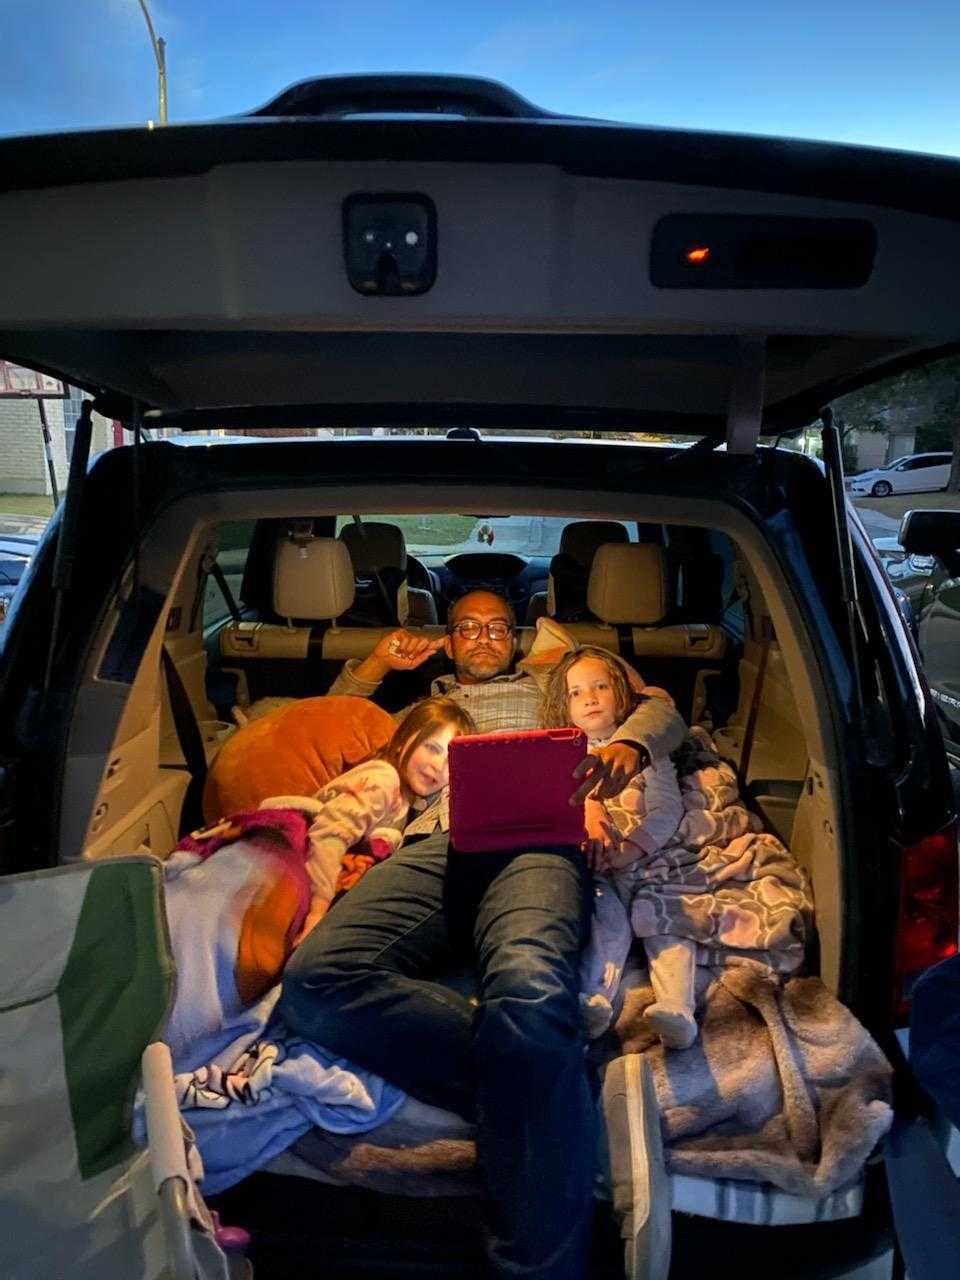 Will hurd with family inside the car on Thanksgiving